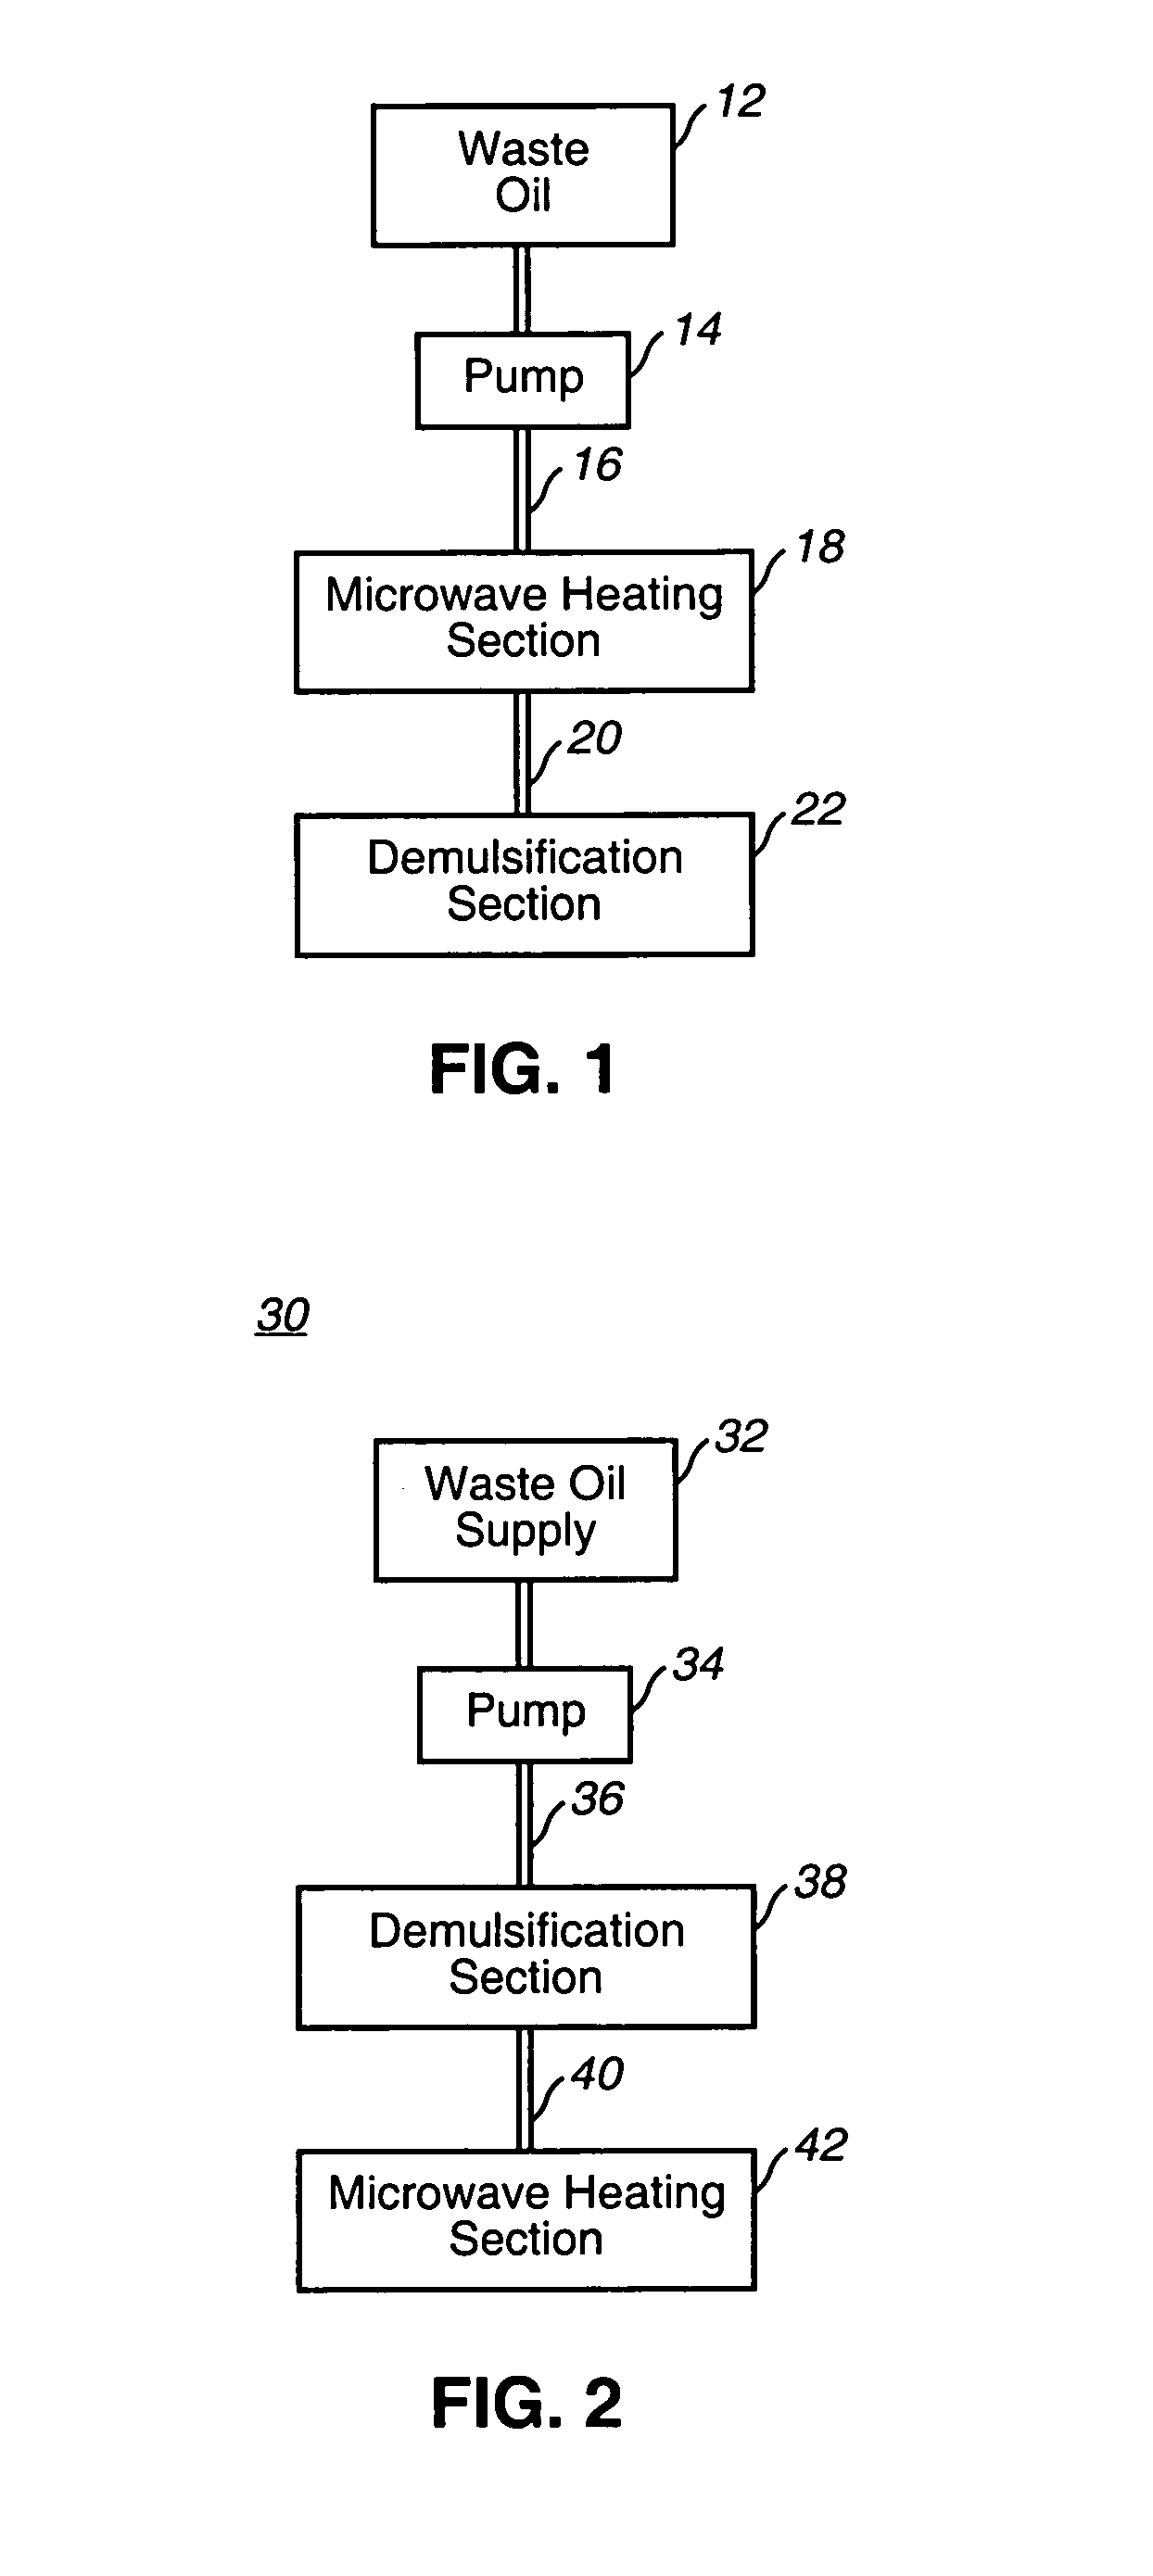 Process for treating waste oil